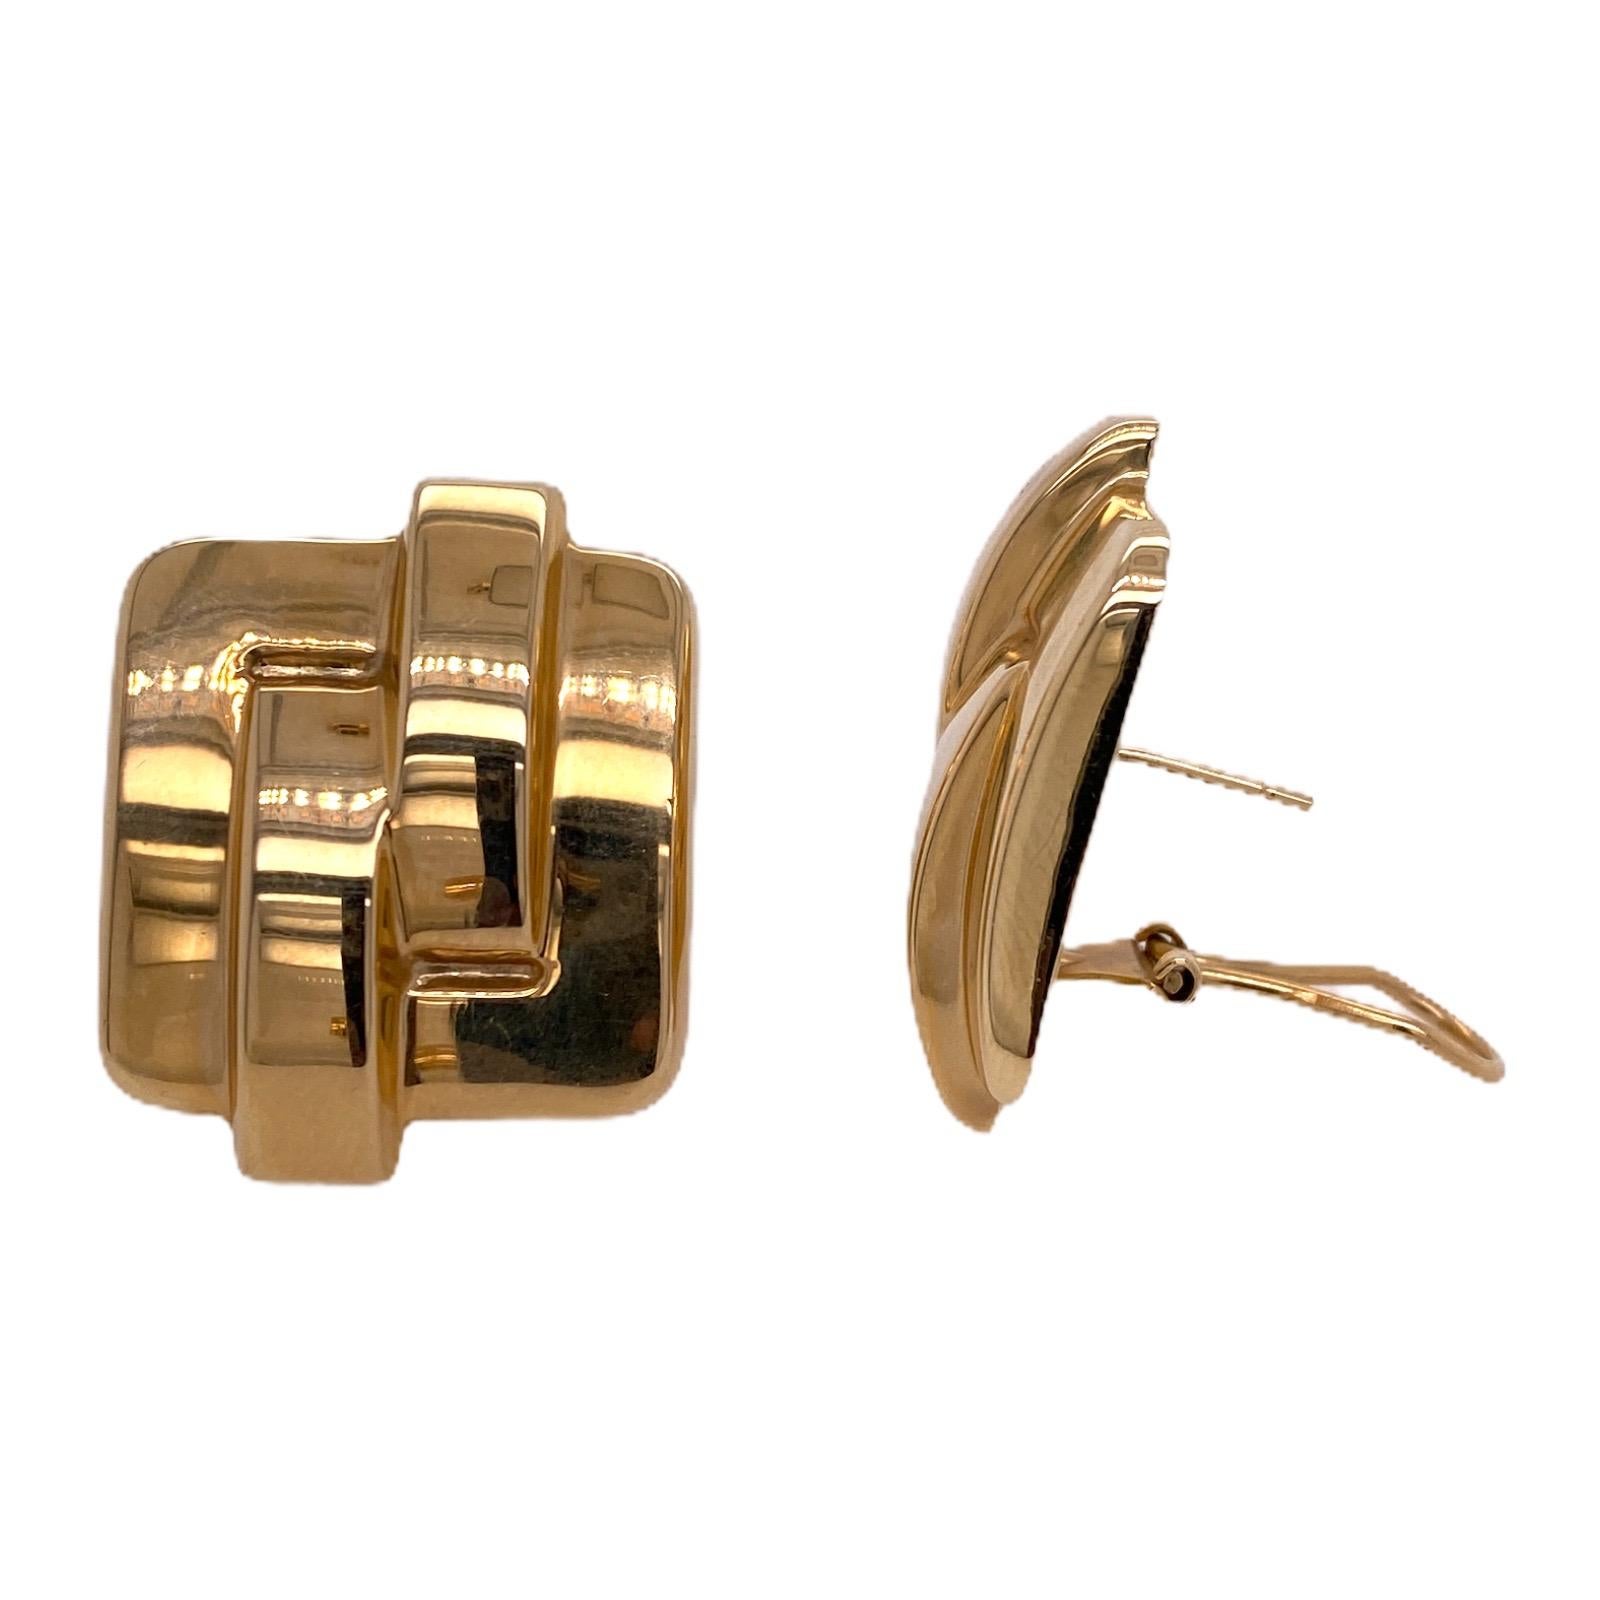 Vintage square light weight earrings fashioned in 14 karat yellow gold. The earrings feature lever backs and measure 1.0 inch in length and 1.0 inch in width. 